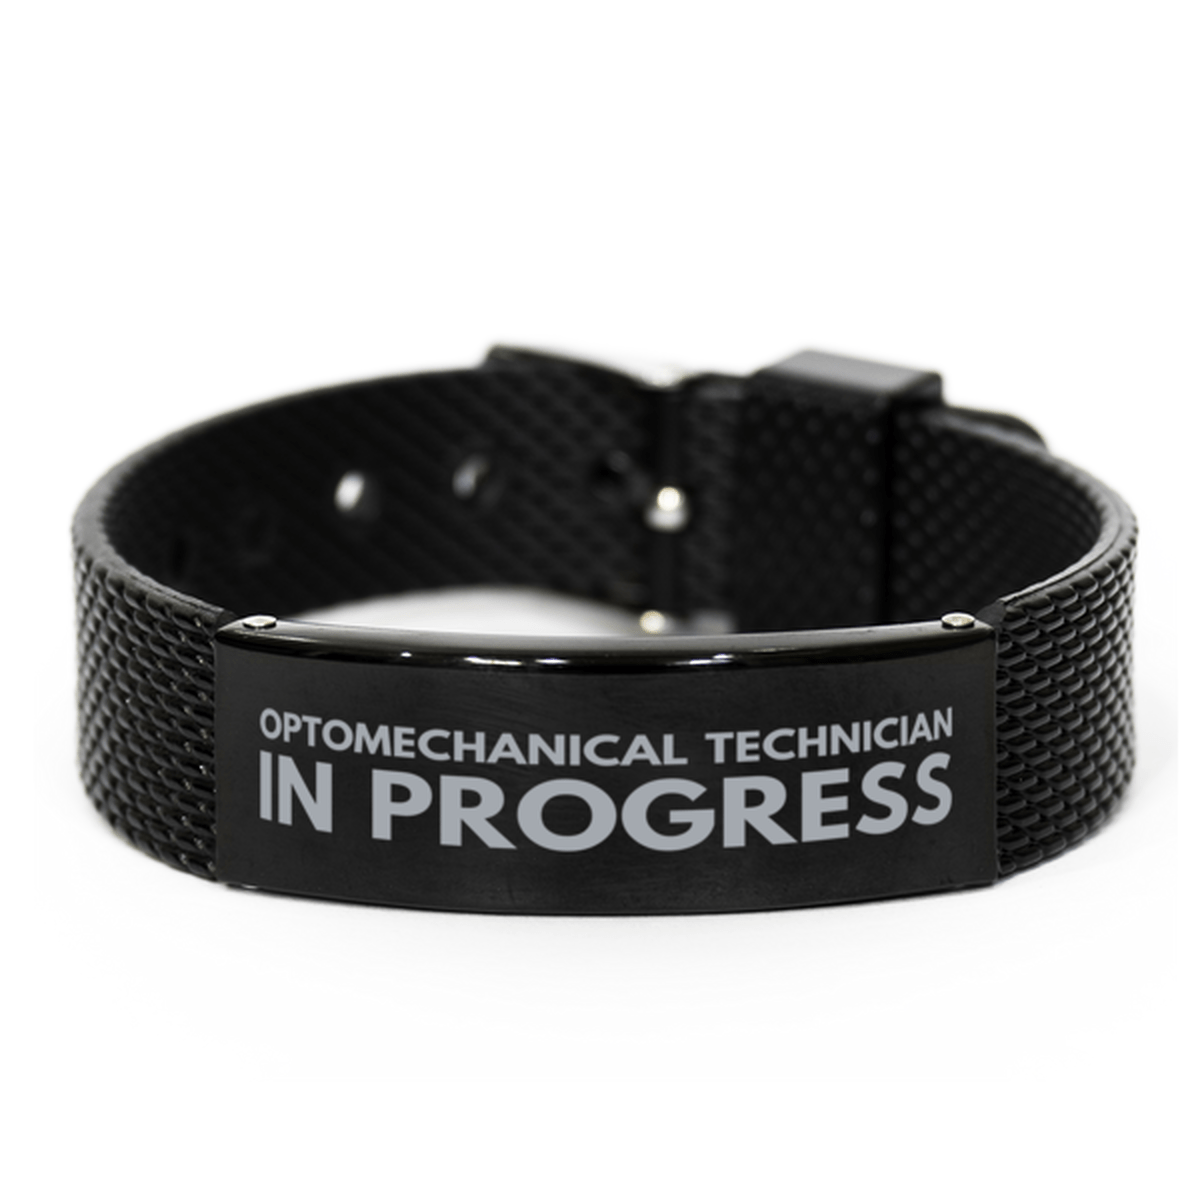 Inspirational Optomechanical Technician Black Shark Mesh Bracelet, Optomechanical Technician In Progress, Best Graduation Gifts for Students